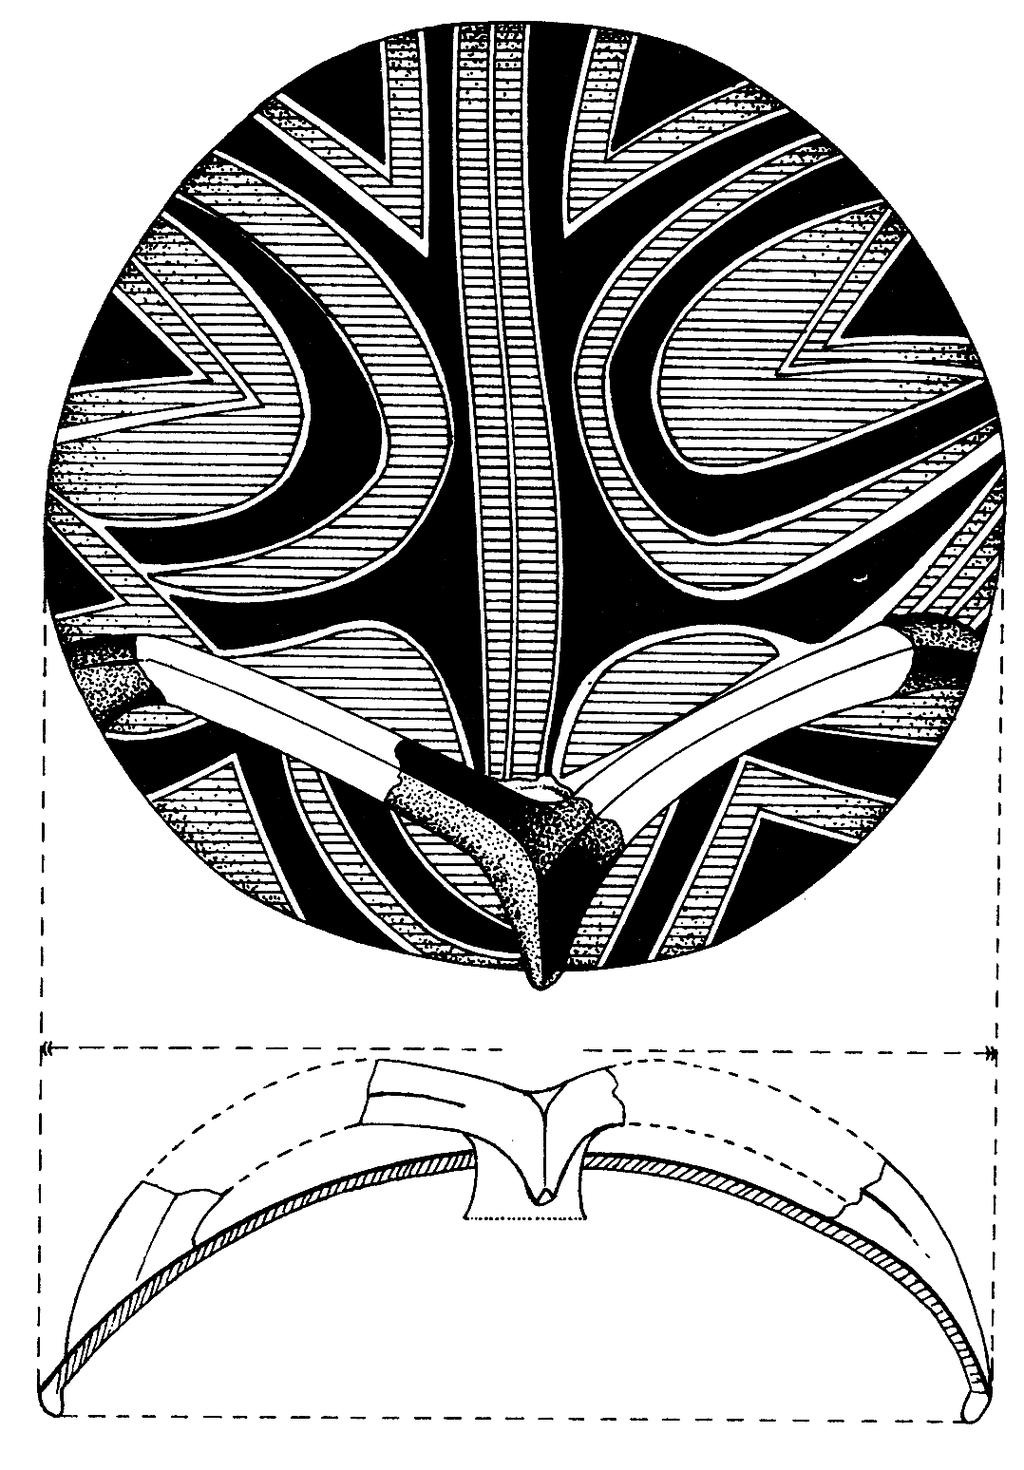 Fig. VIIB.37. The symbolic design of the opened ram horns, according to type AD, informs a handle on a Gumelniţa lid from the eponymous site (after Marija Gimbutas 1989, p. 76, fig. 119).